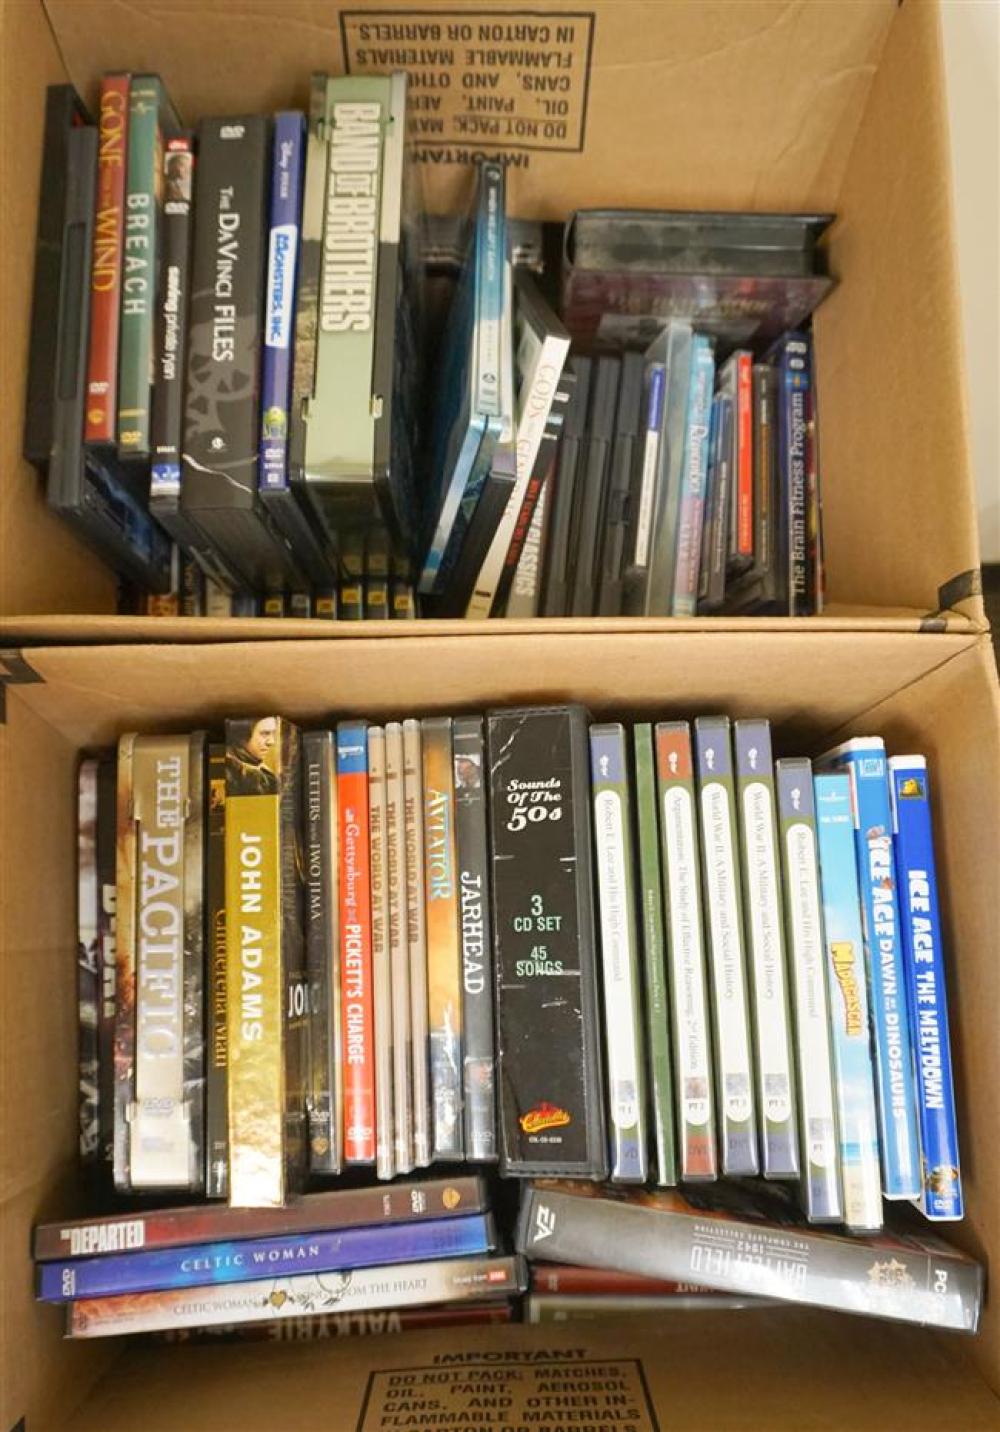 TWO BOXES OF DVD'S AND CD'STwo